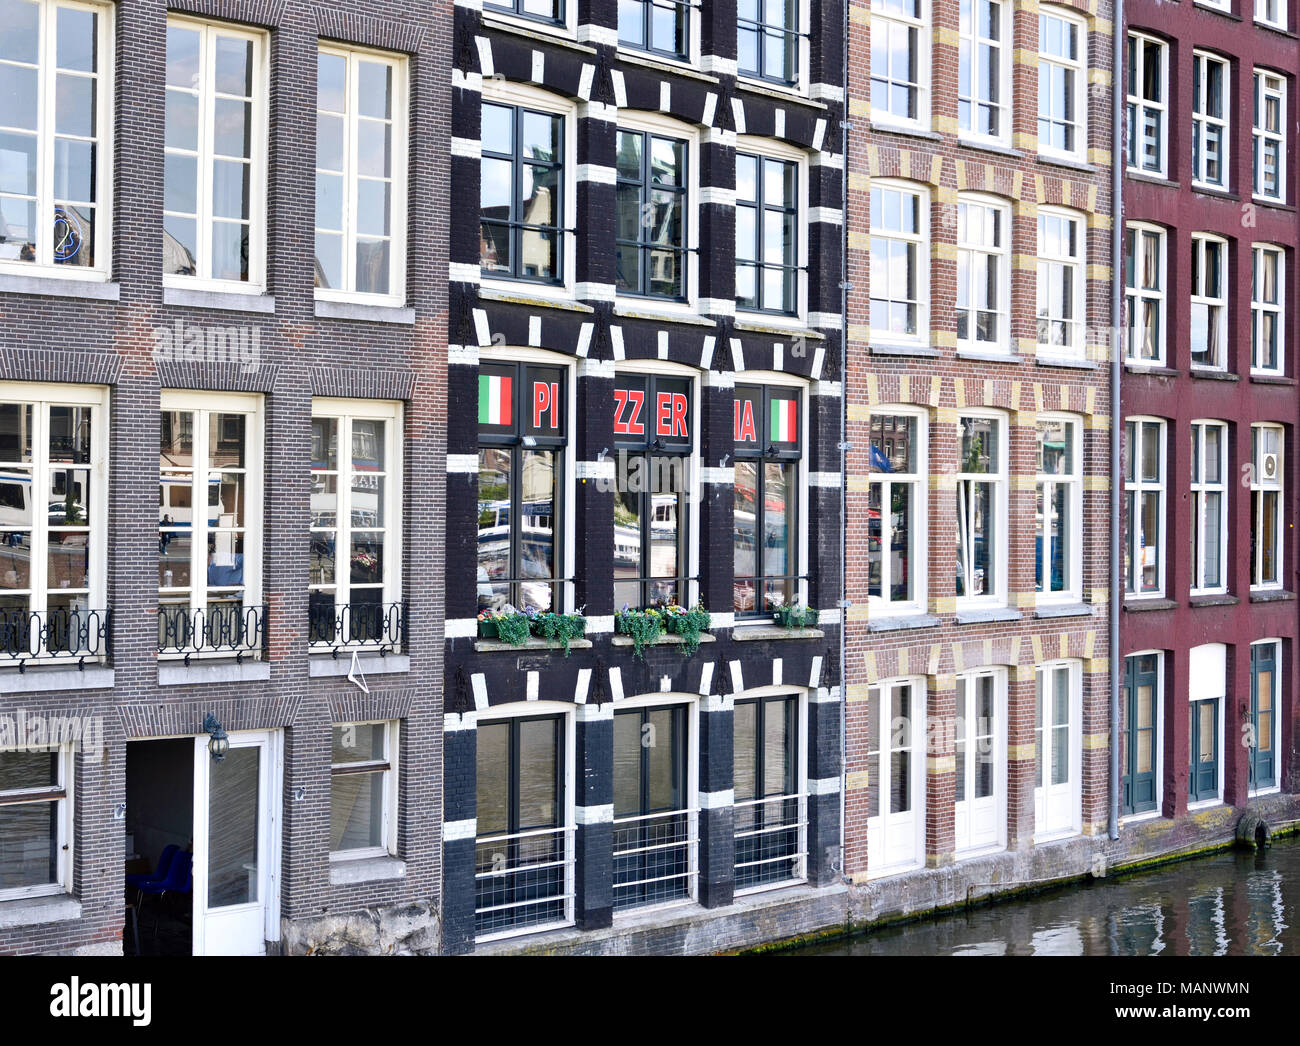 Dutch house facades in Amsterdam, Netherlands. Stock Photo